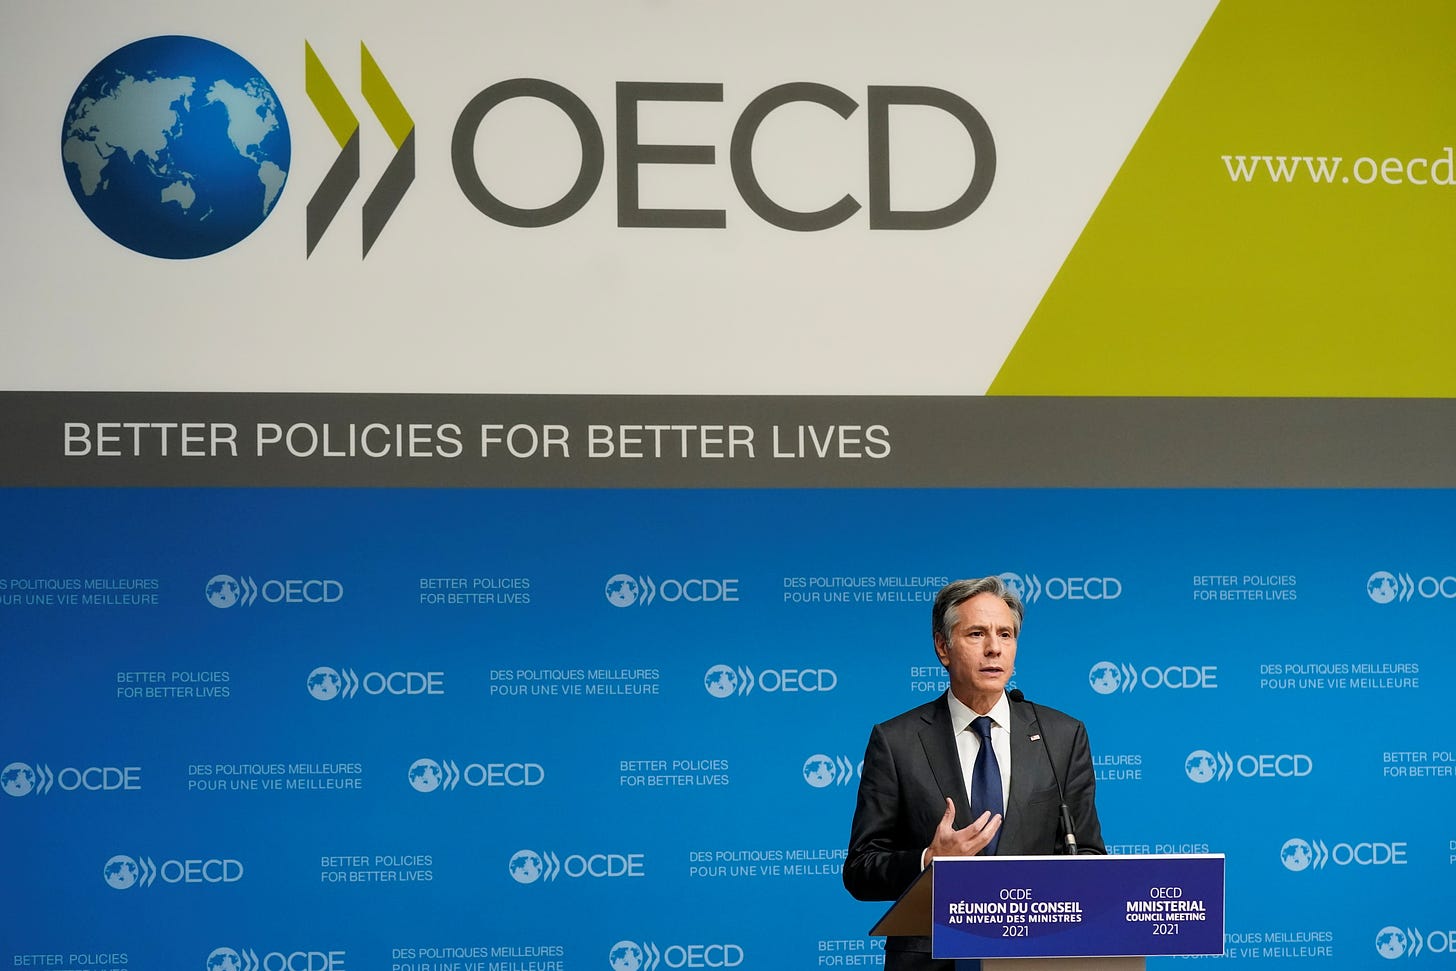 U.S. Secretary of State Antony Blinken speaks during a press briefing with Mathias Cormann, Secretary-General of the Organization for Economic Cooperation and Development, at the OECD's Ministerial Council Meeting, in Paris, France October 6, 2021.  Patrick Semansky/Pool via REUTERS